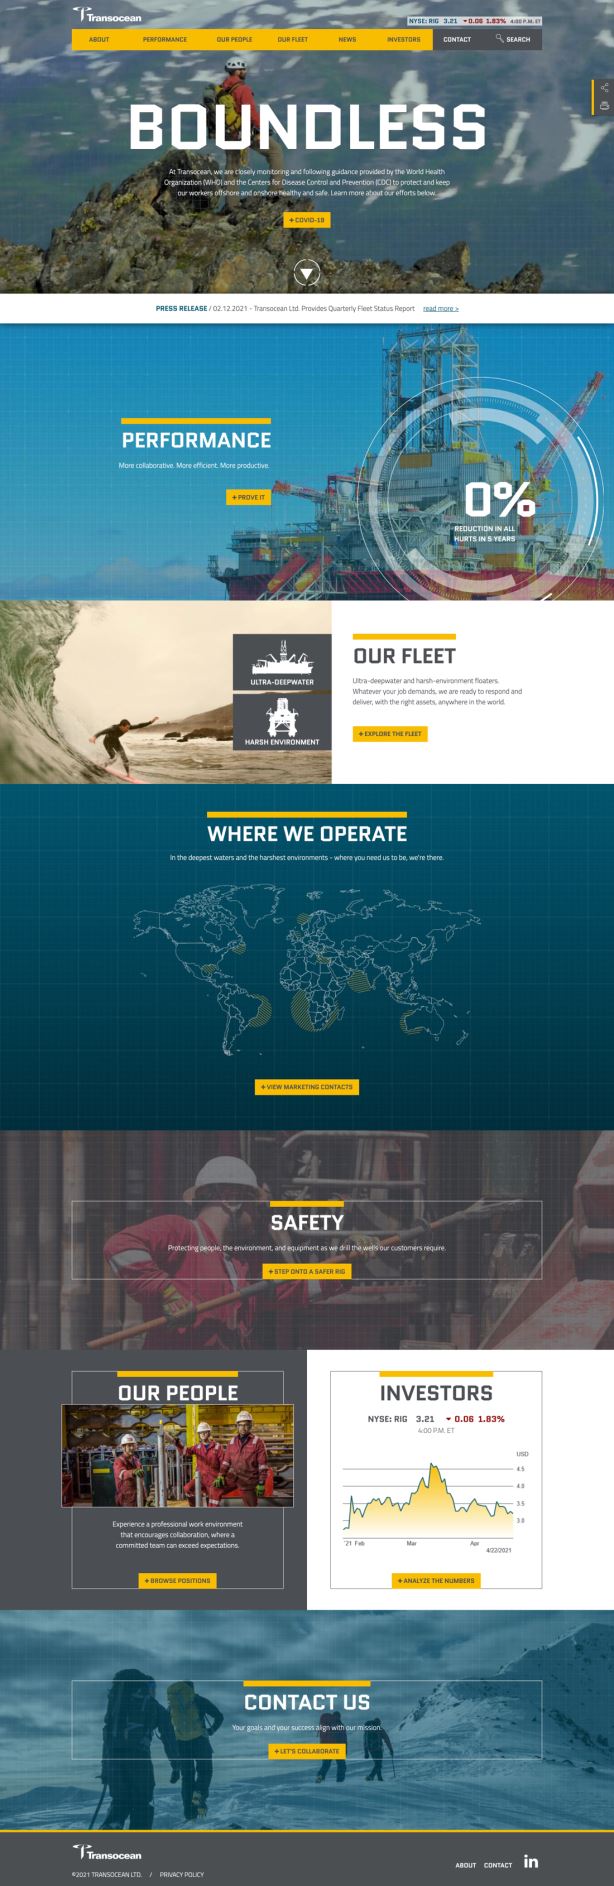 A scrollable screen capture of the Transocean Homepage.